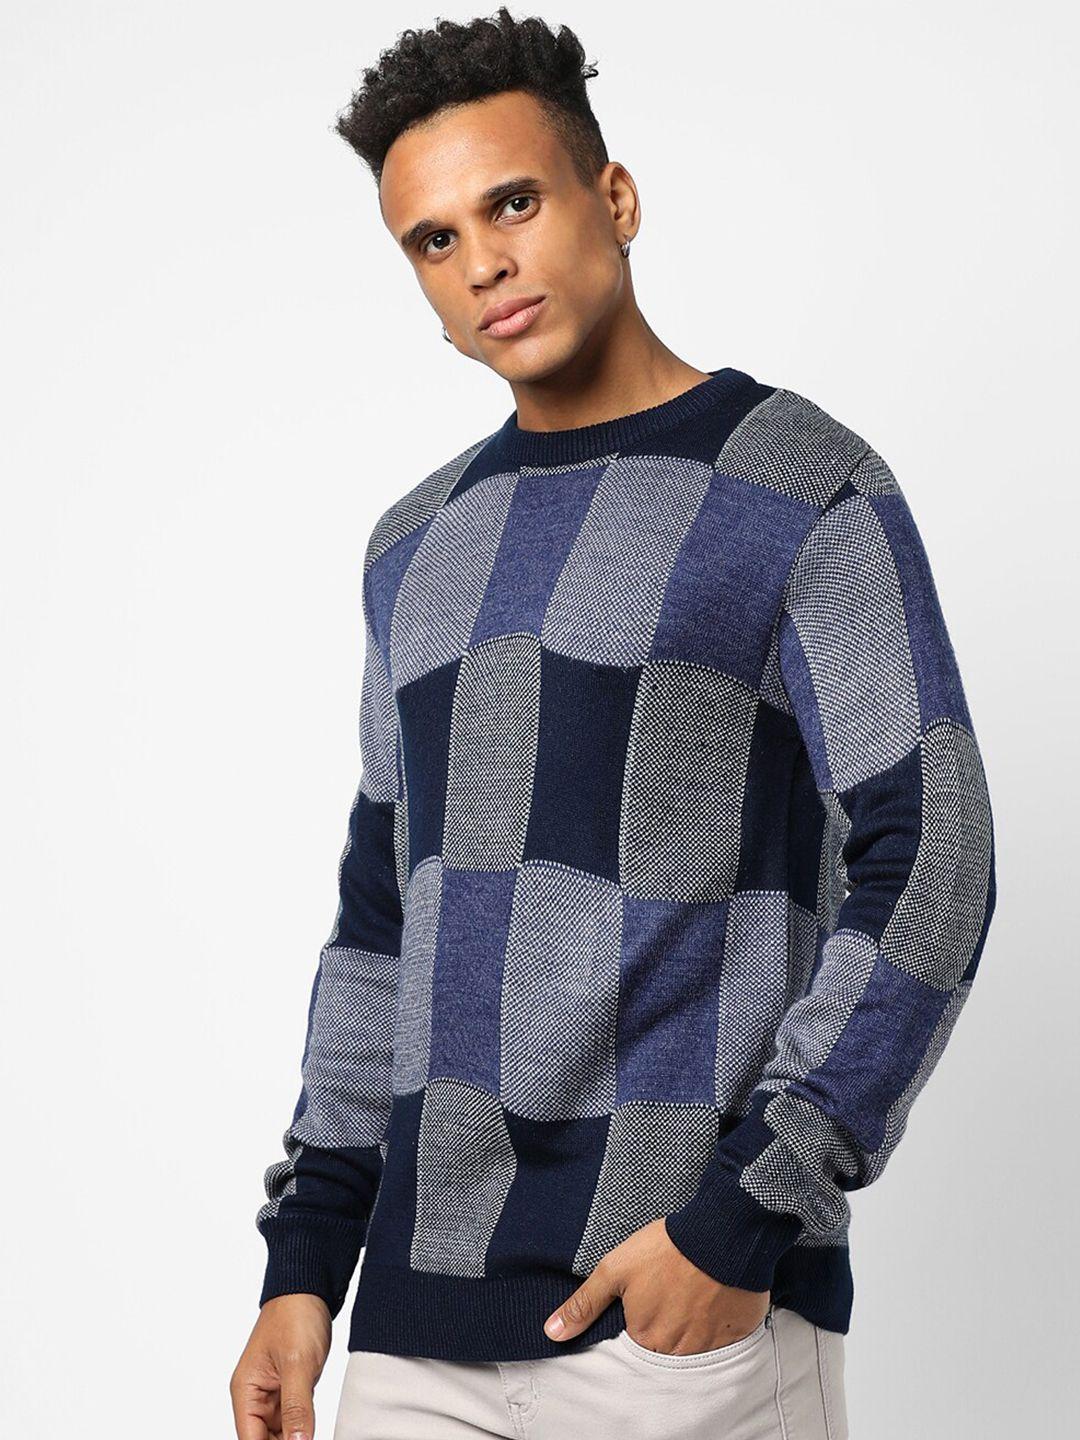 Campus Sutra Men Navy Blue & Grey Checked Pullover Regular Fit Casual Sweater